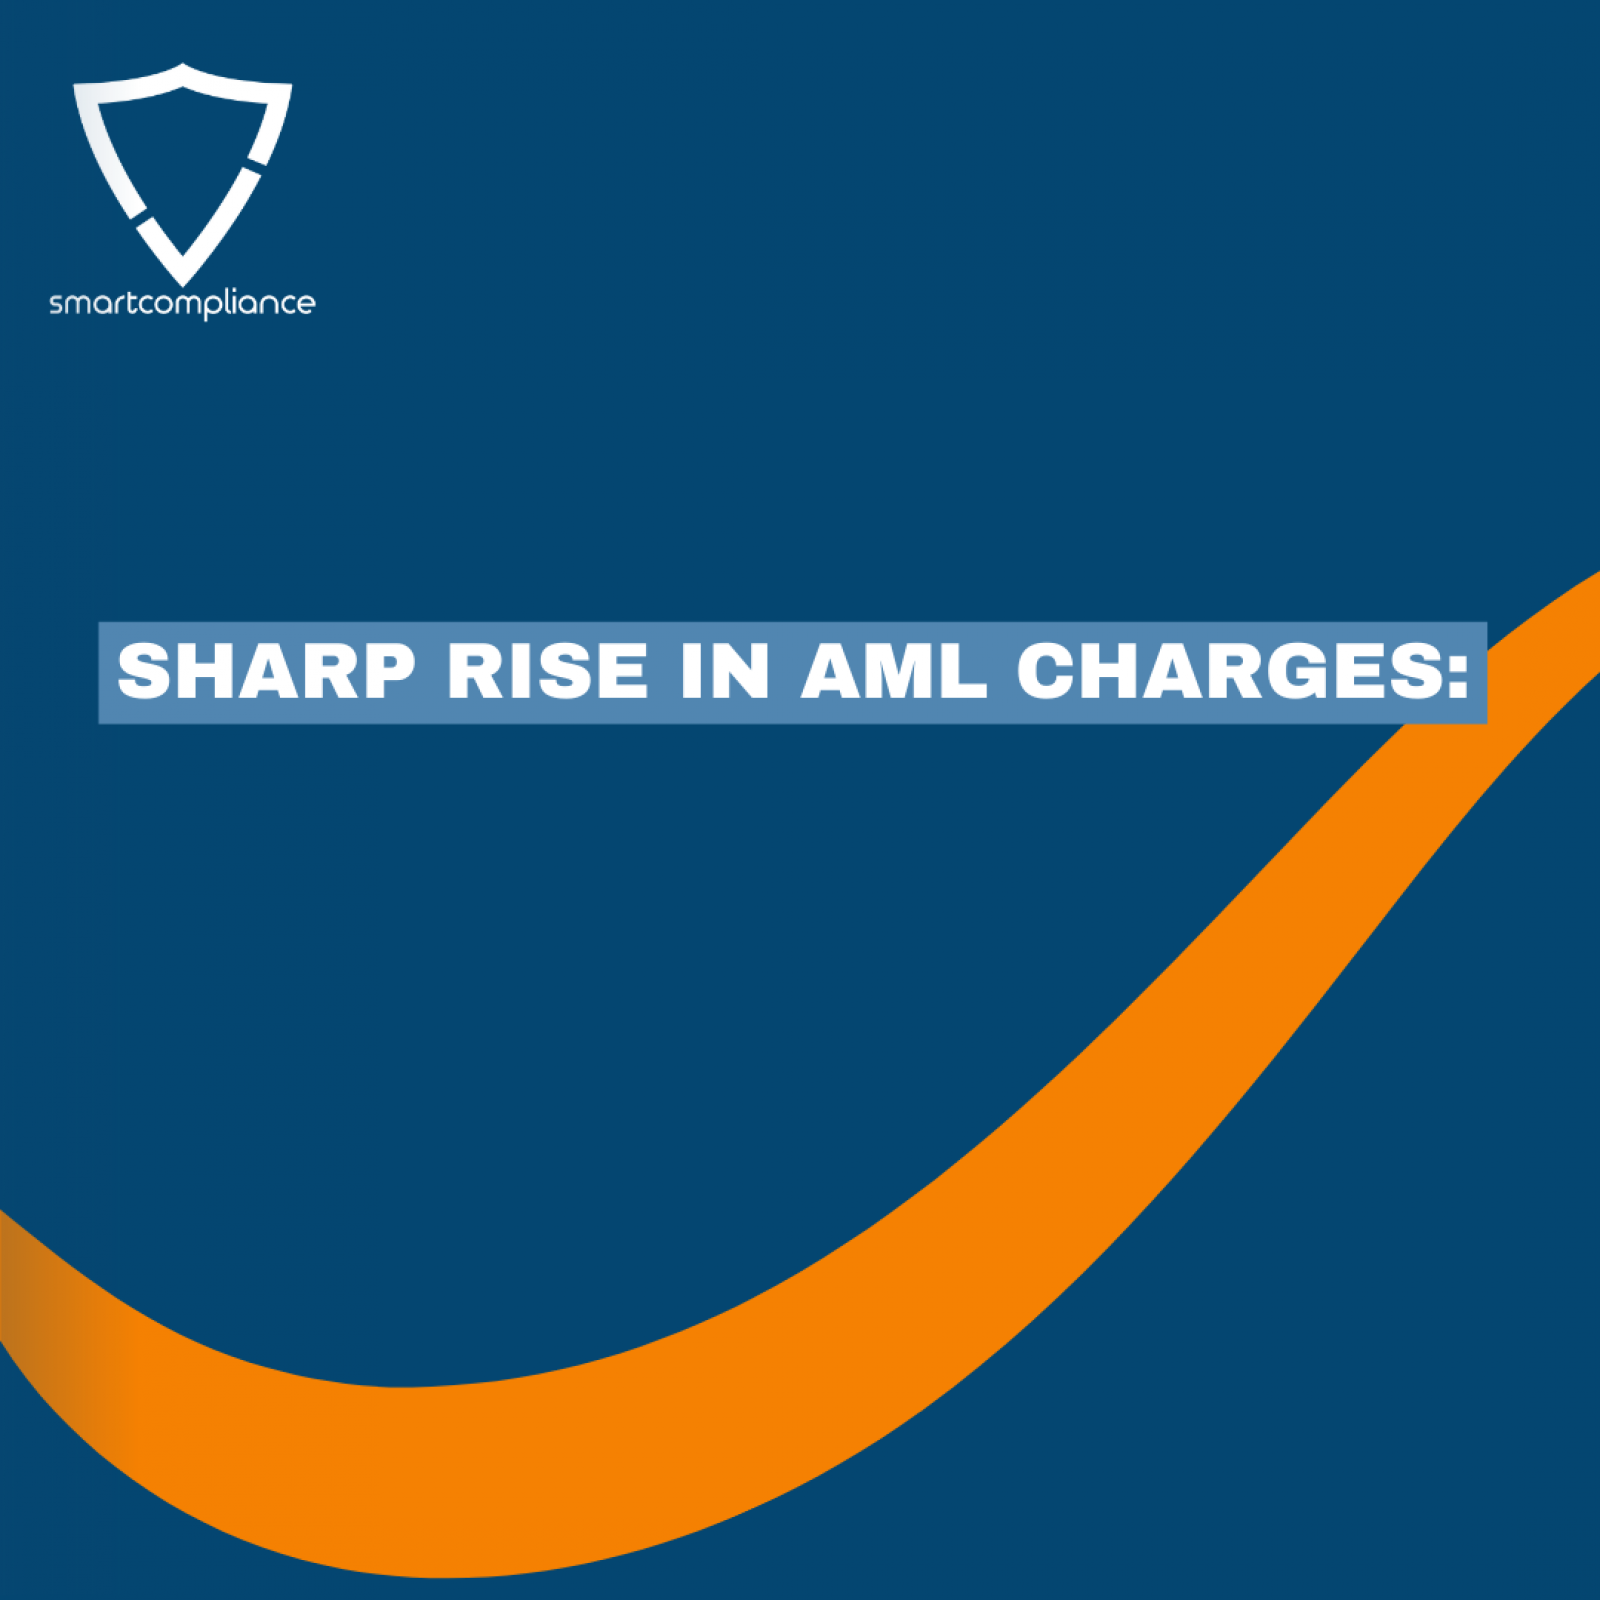 Sharp Rise in AML Charges